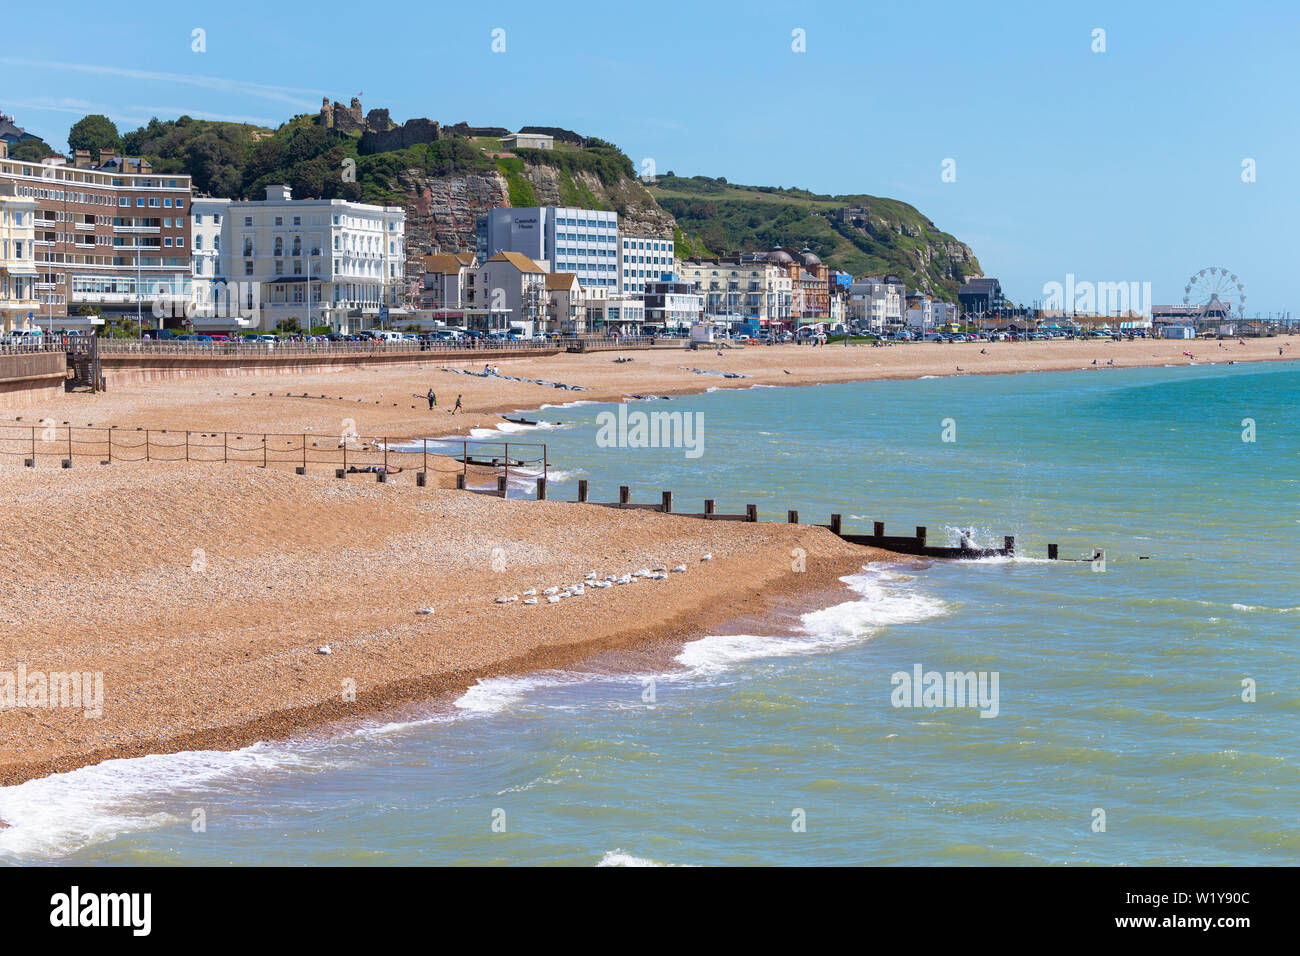 Hastings seafront and empty beach, east sussex, uk Stock Photo